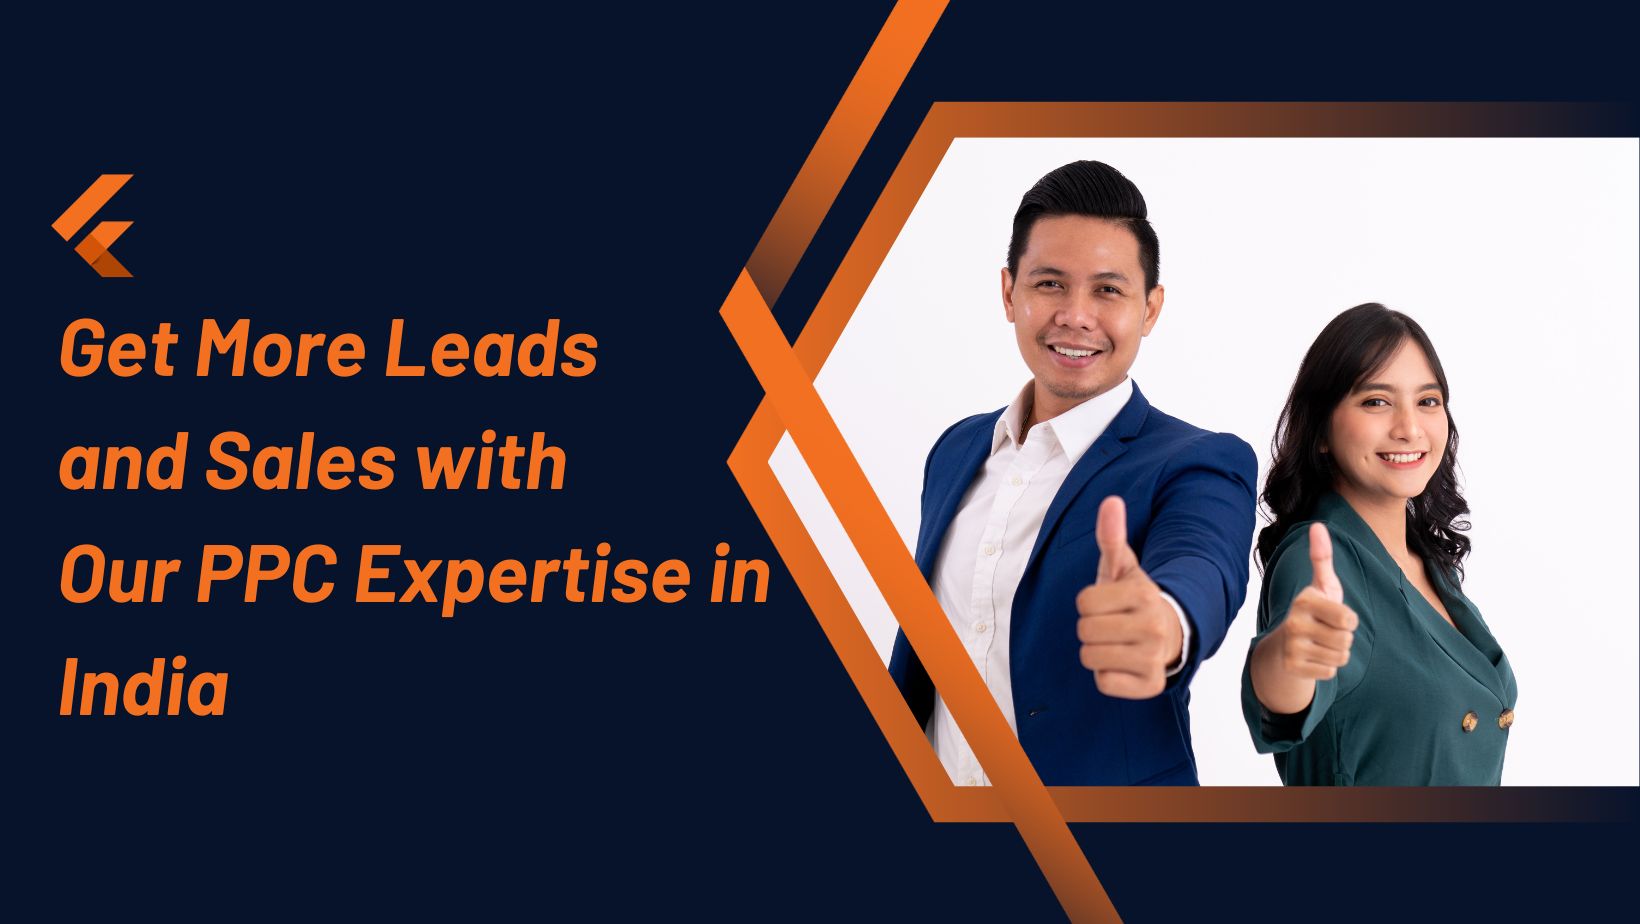 Get More Leads and Sales with Our PPC Expertise in India